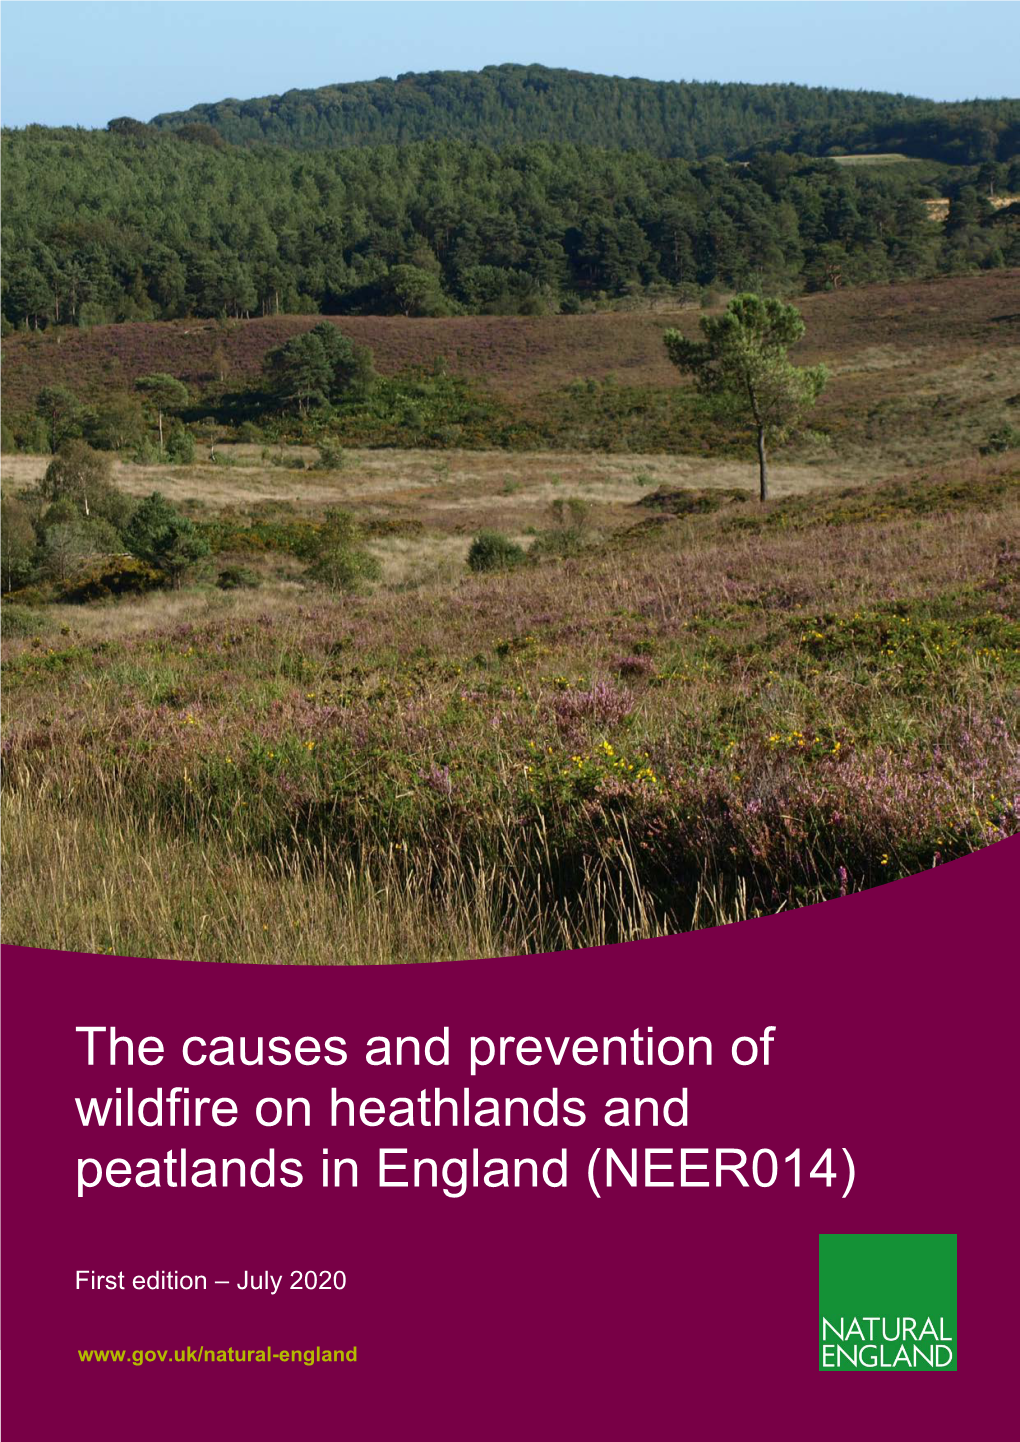 The Causes and Prevention of Wildfire on Heathlands and Peatlands in England (NEER014)